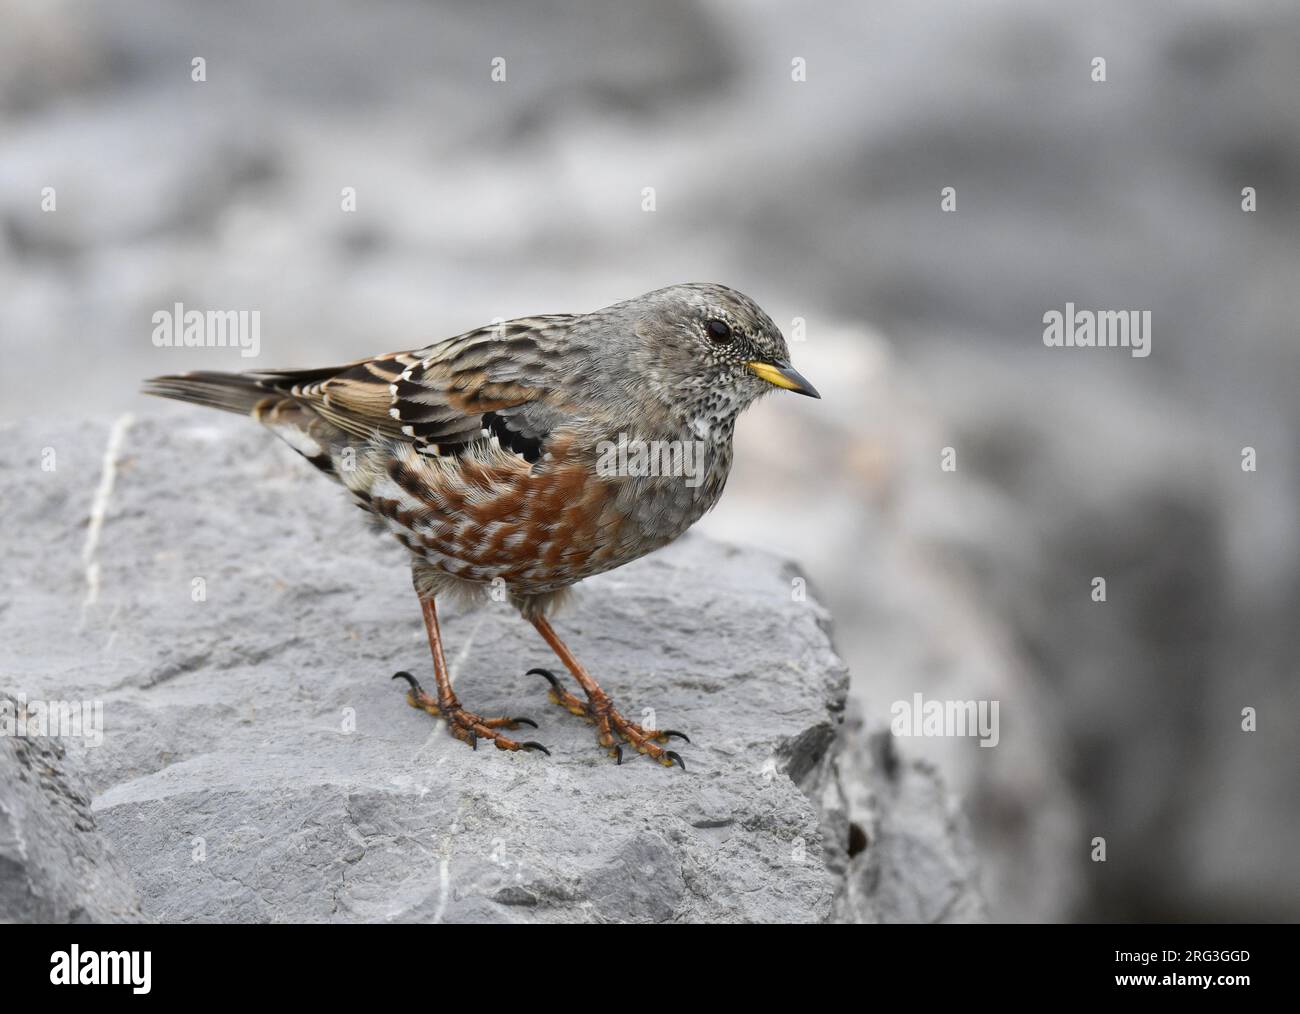 Adult Alpine Accentor (Prunella collaris) during late summer or early autumn in Spain. Stock Photo